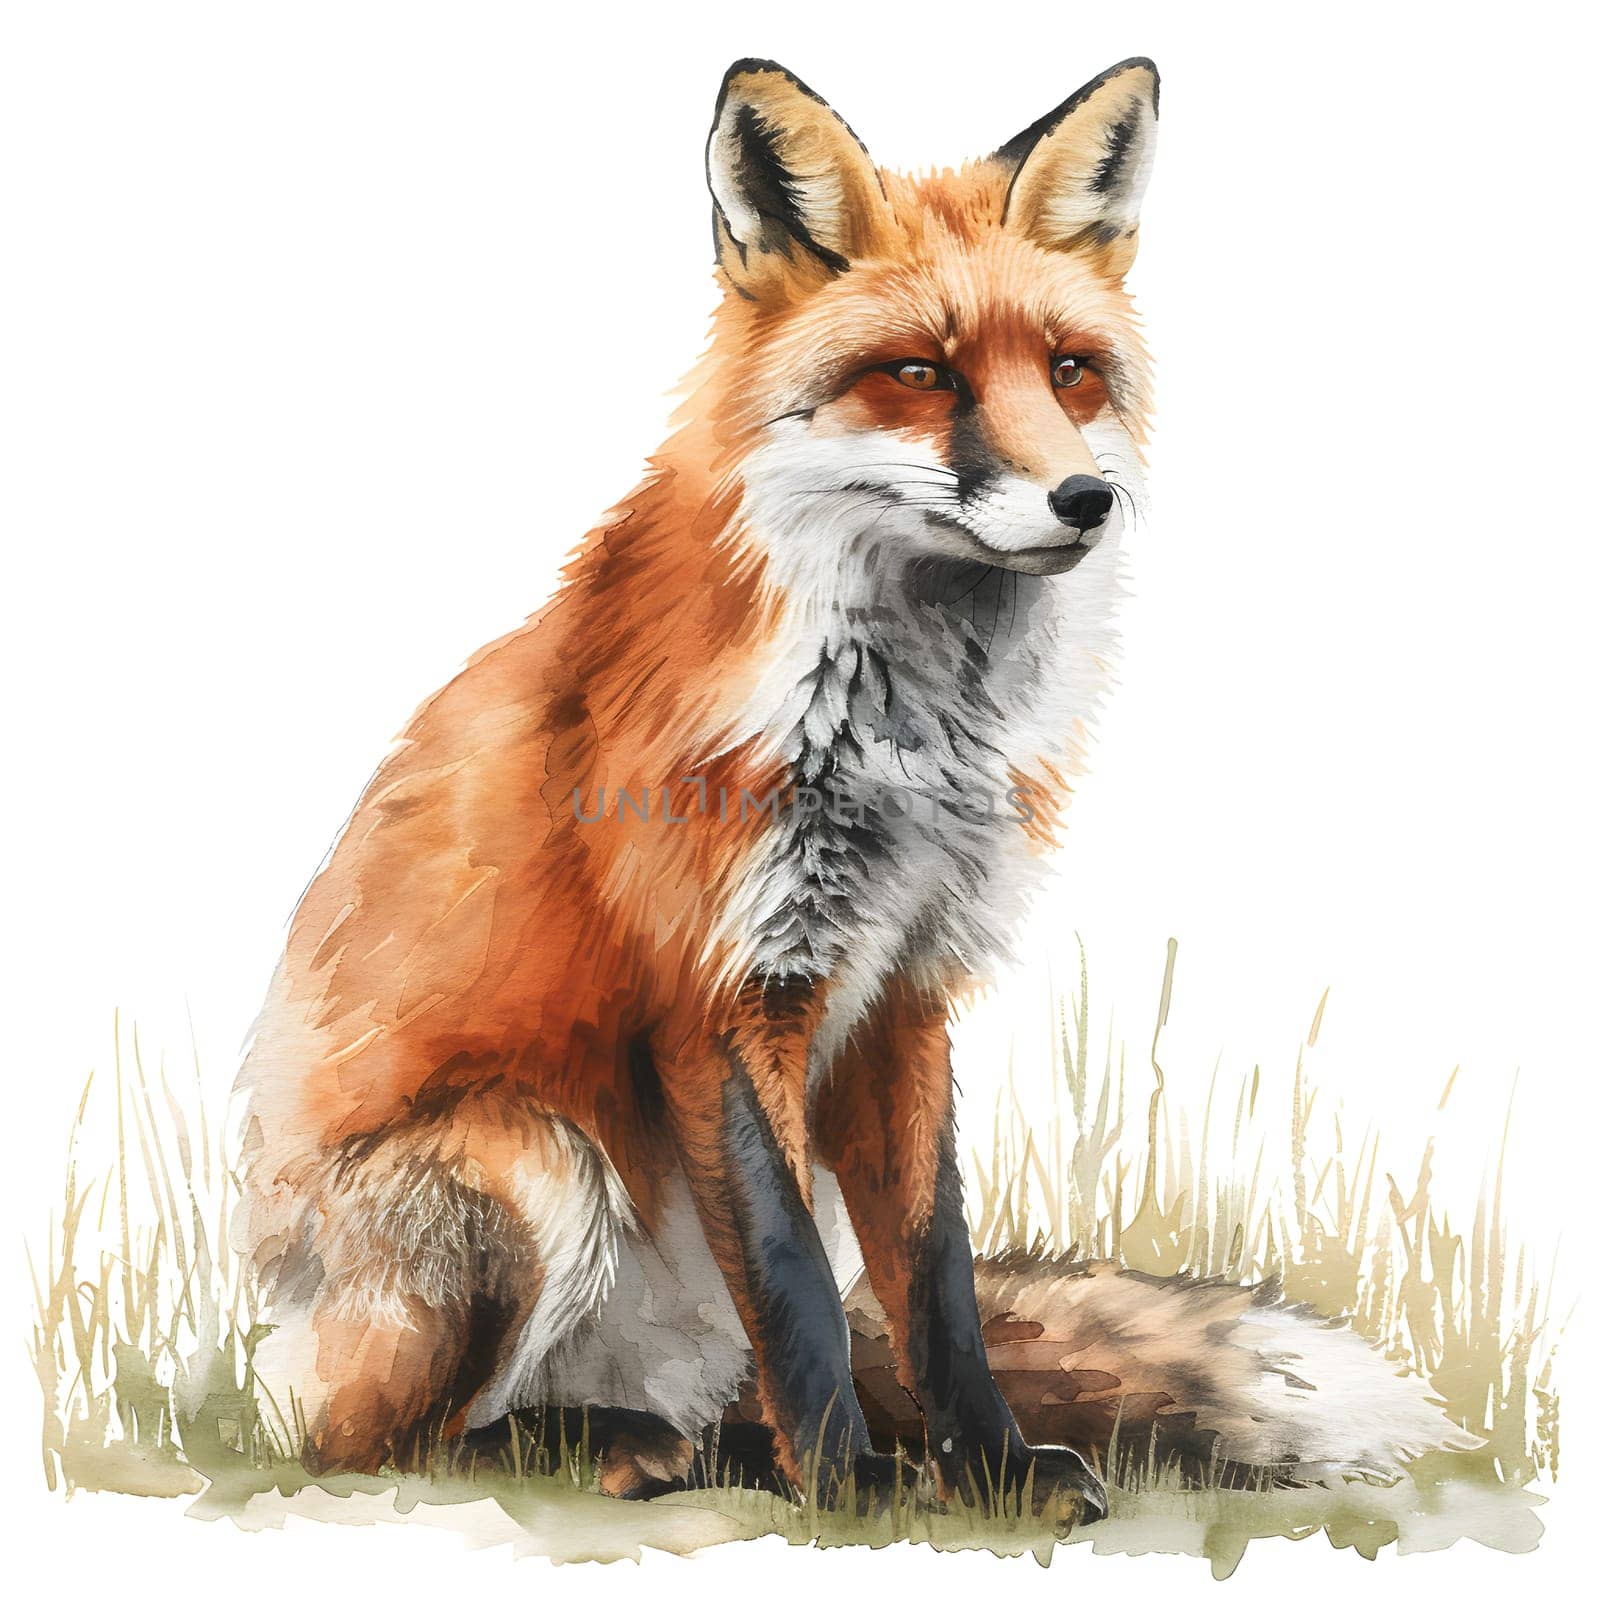 A red fox sits in the grass, depicted on a white background in a painting by Nadtochiy